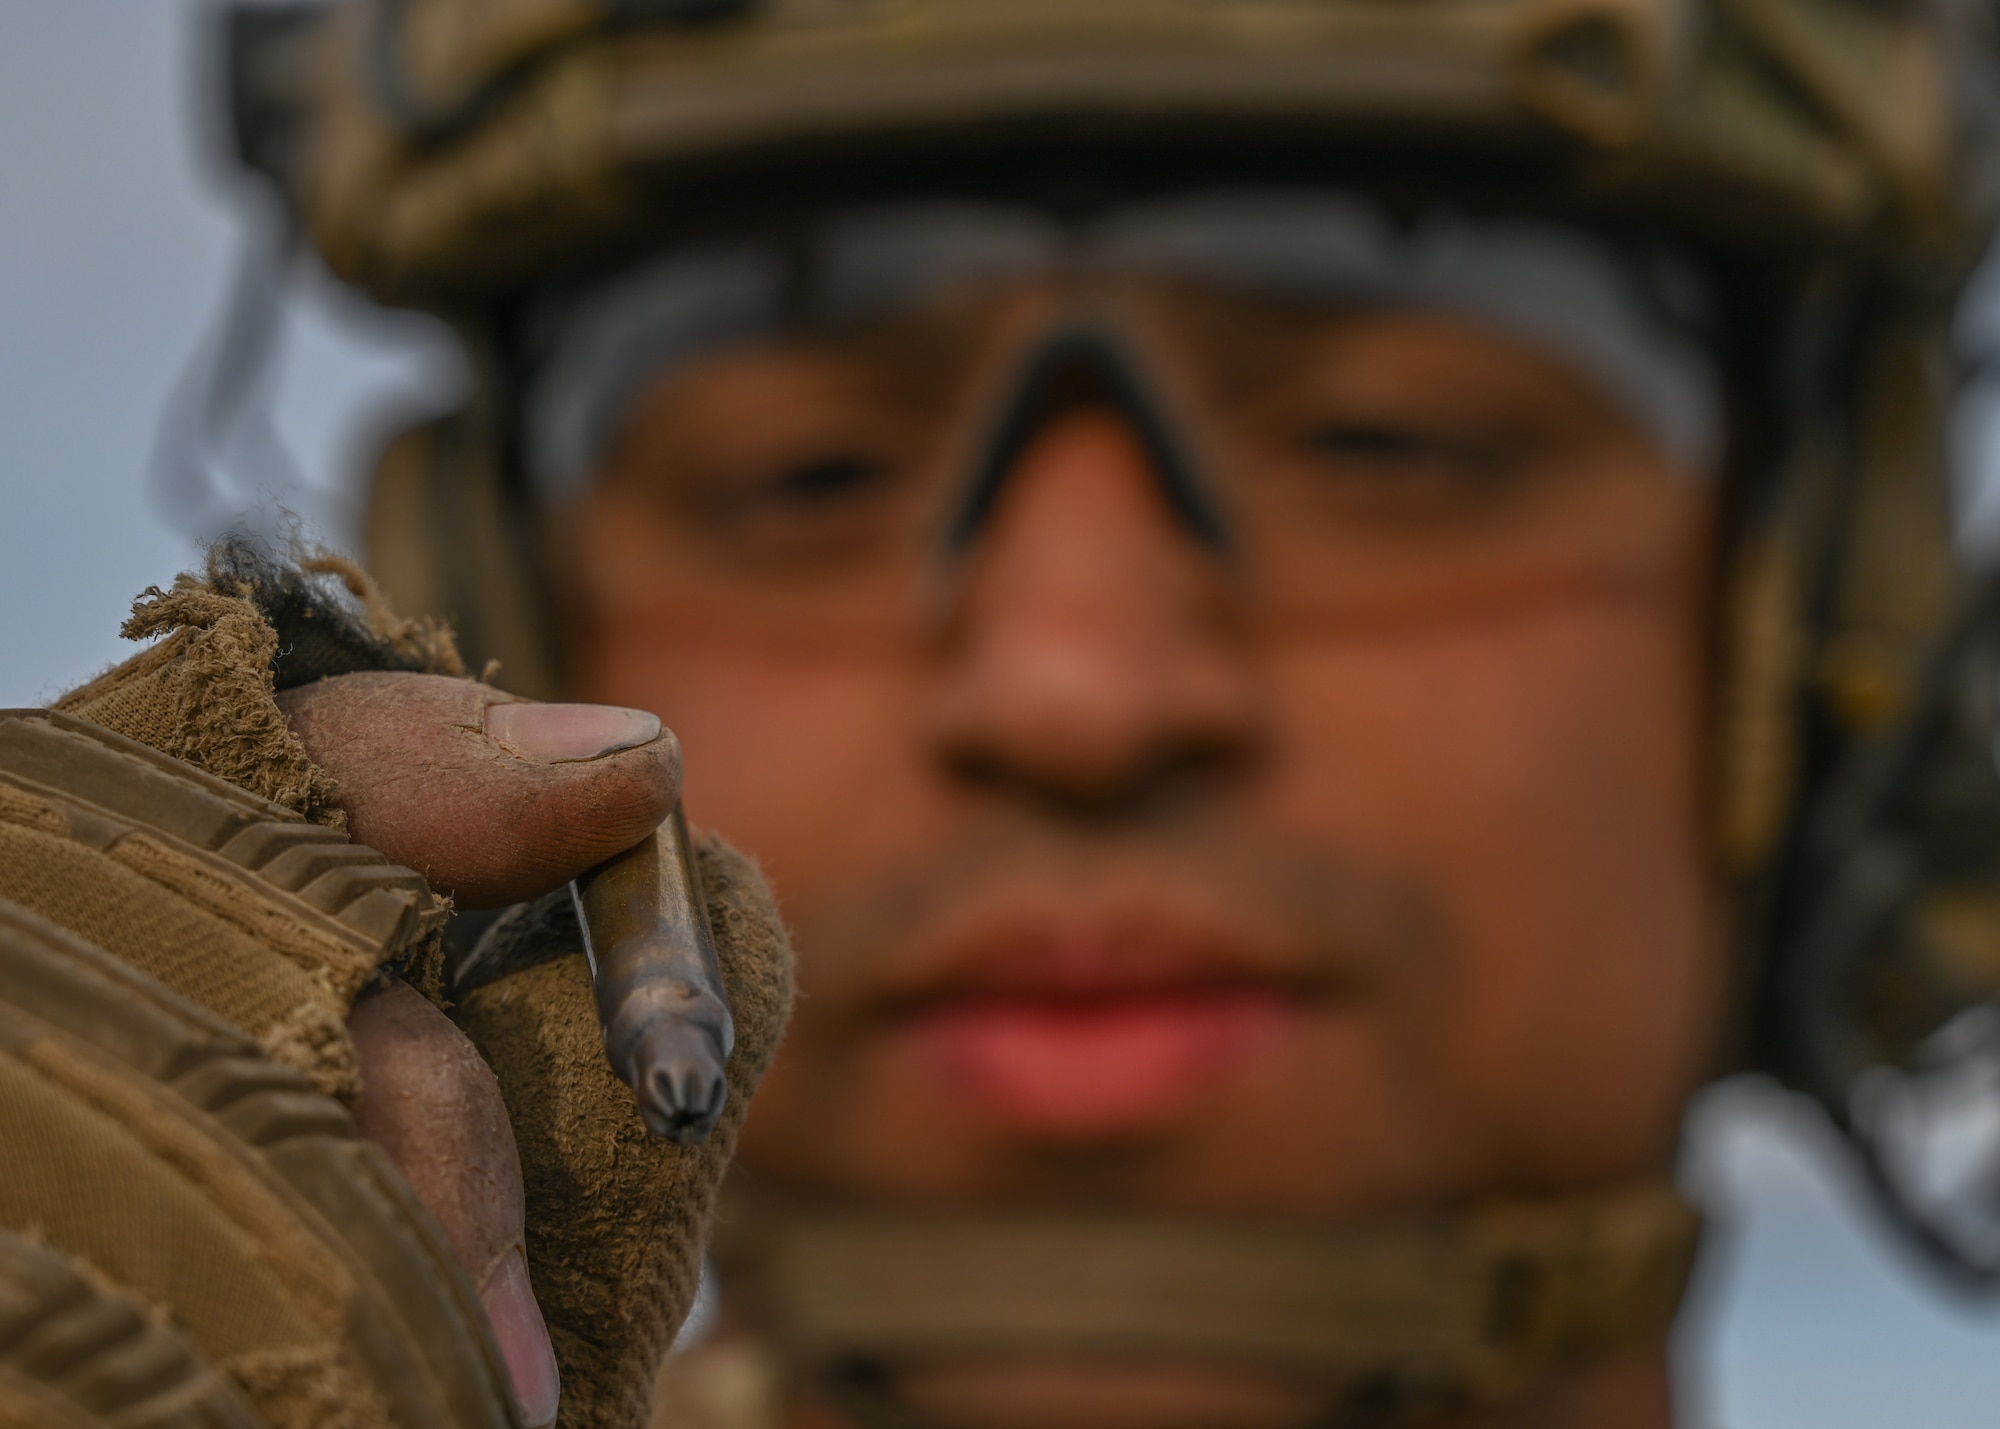 A U.S. Air Force tactical air control party Airman with the 5th Air Support Operations Squadron examines a 5.56mm ammunition blank shell at Yakima Training Center, Washington, April 28, 2021. Blank ammunition is often used by the 5th ASOS for exercise purposes. (U.S. Air Force photo by Airman 1st Class Callie Norton)